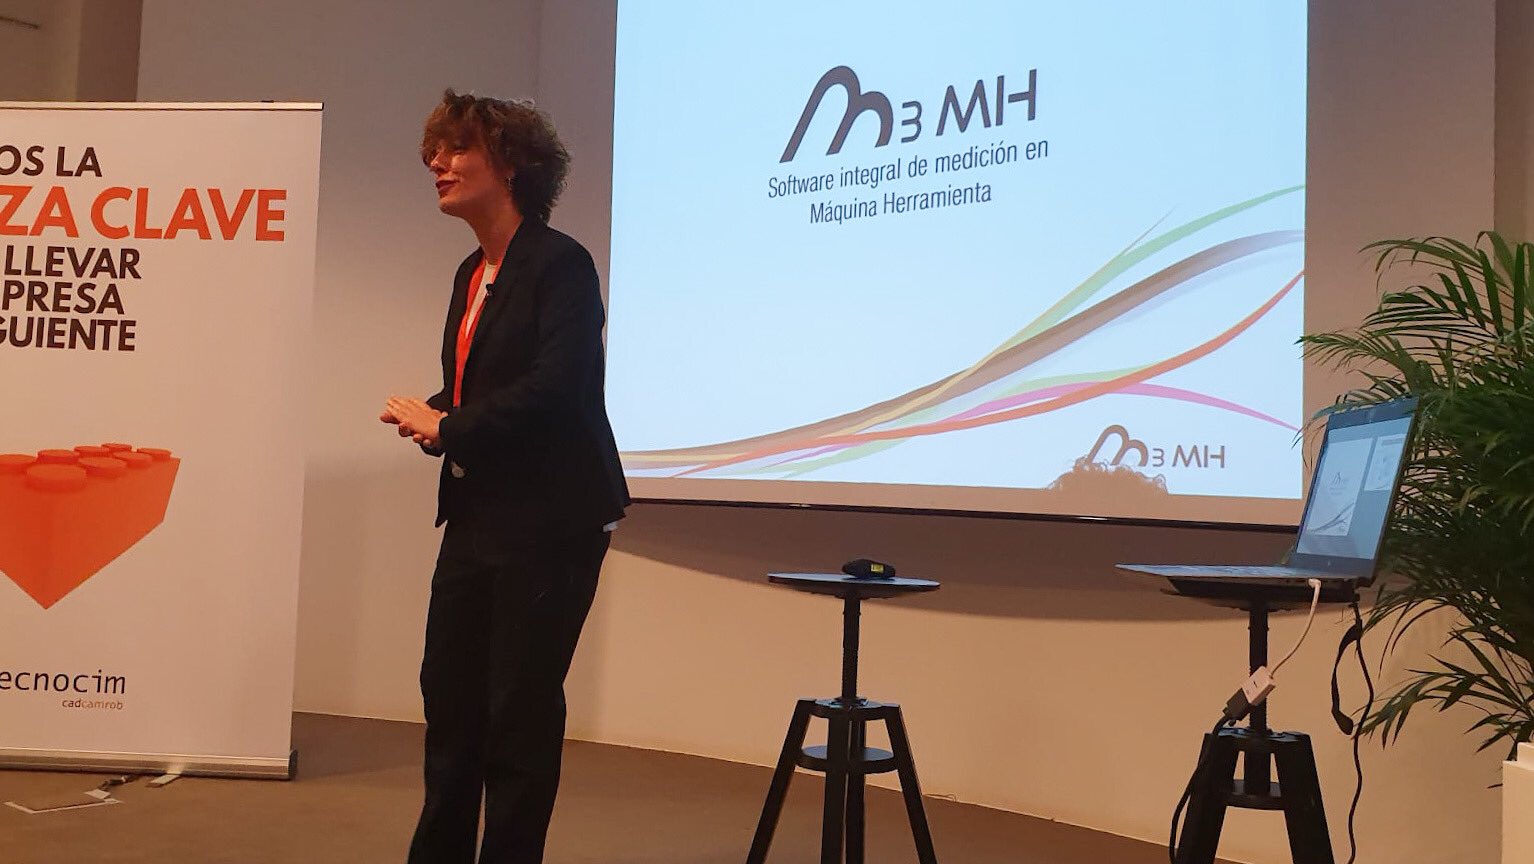 Innovalia Metrology presents M3MH in 4 different cities thanks to the Tecnocim workshops